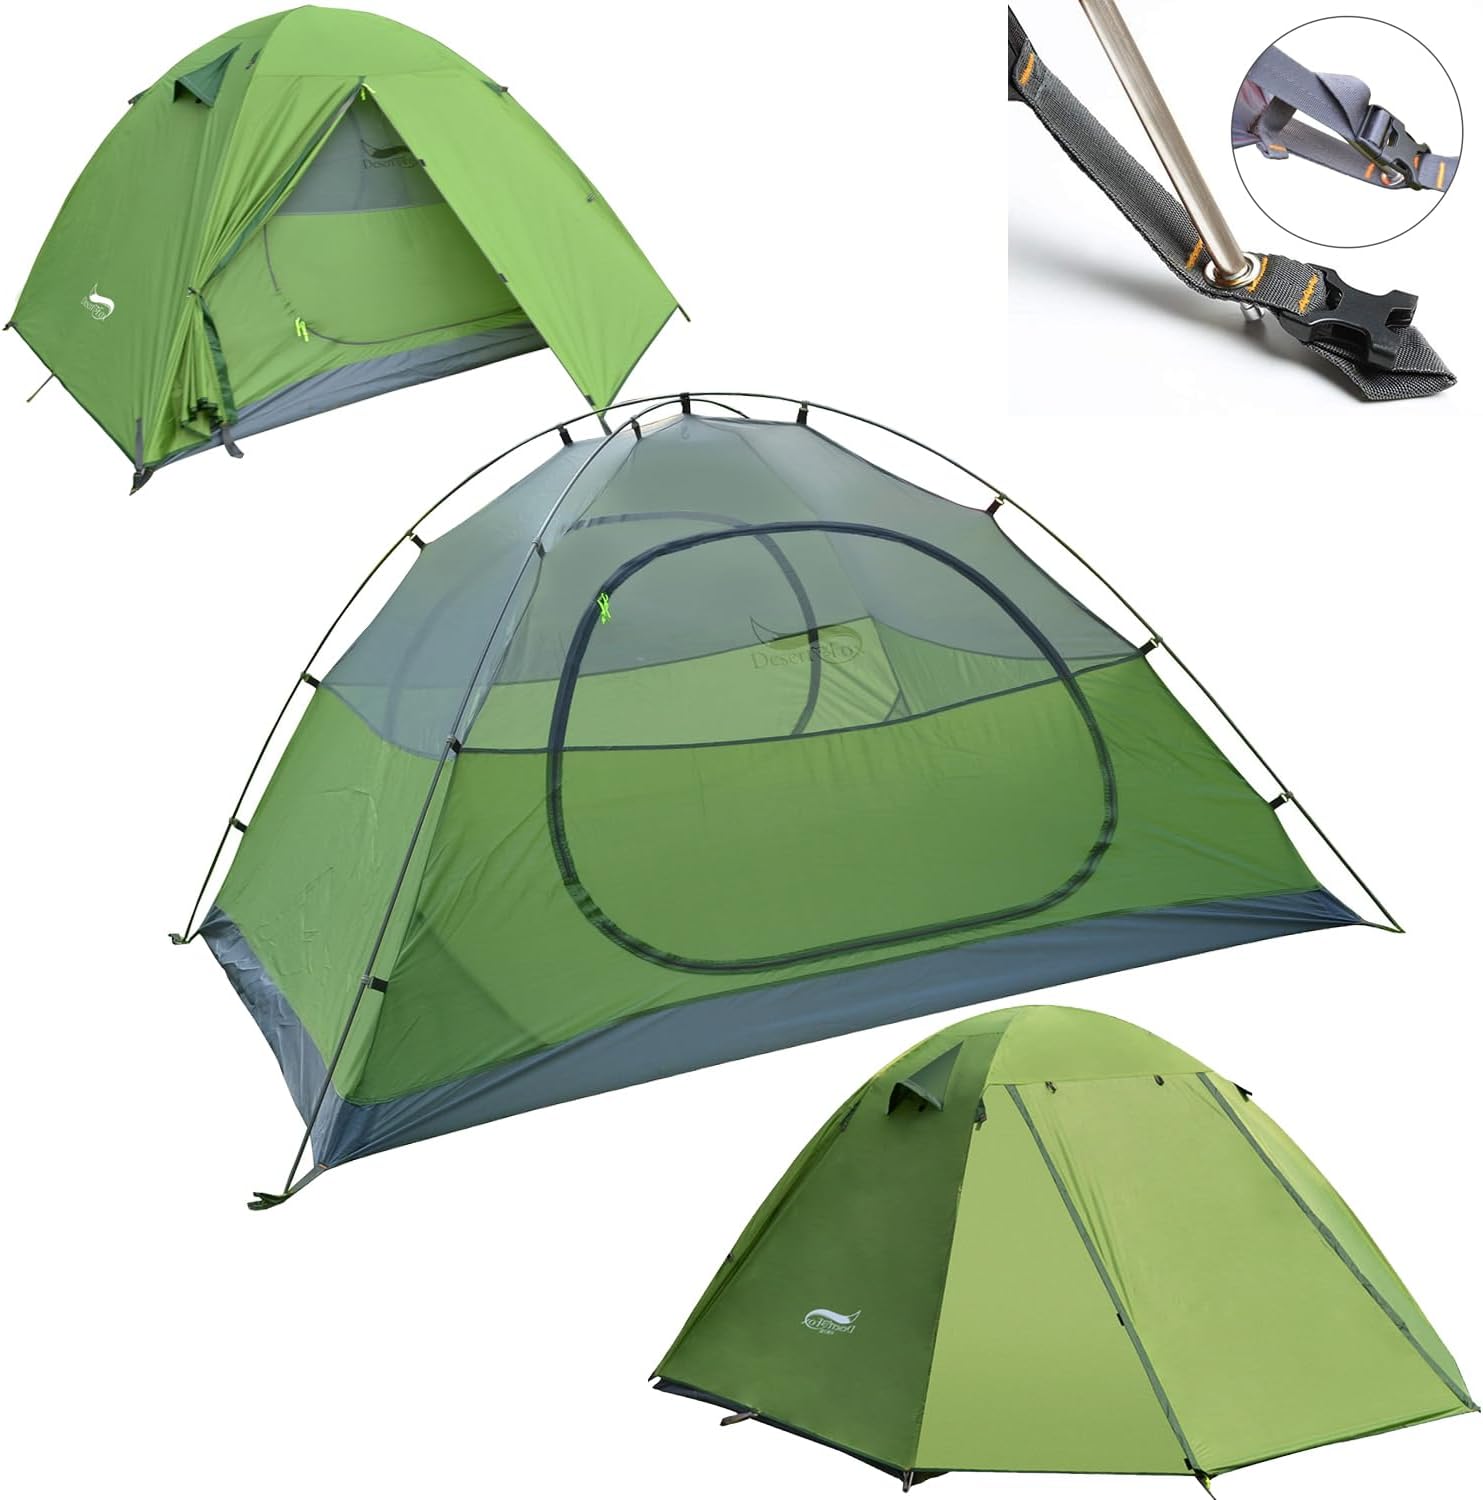 Camping Tents 2 Person,Outdoor Lightweight Backpacking